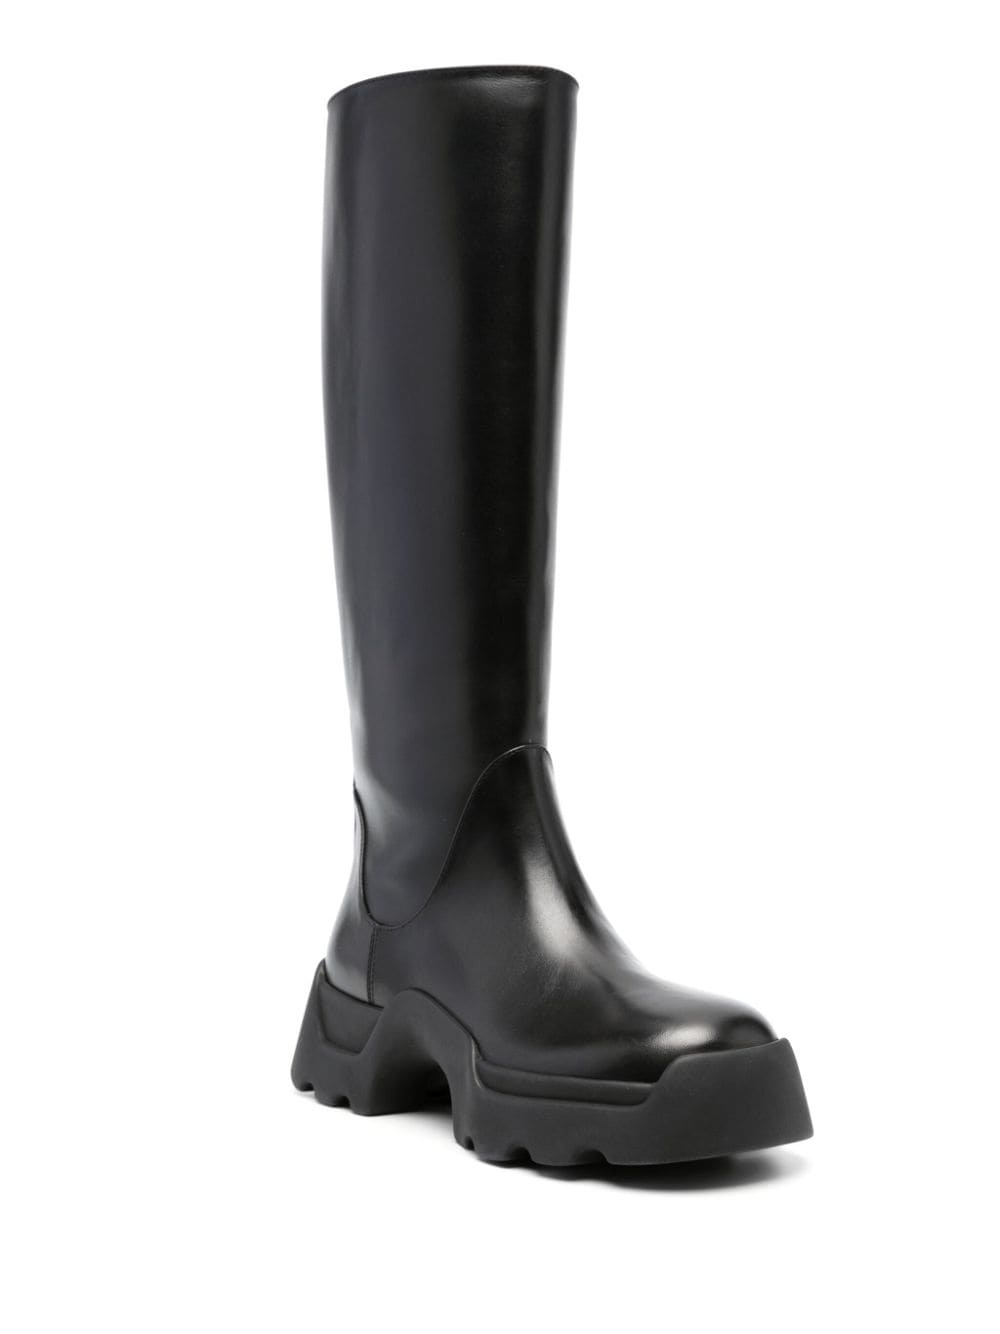 leather knee-high boots - 2